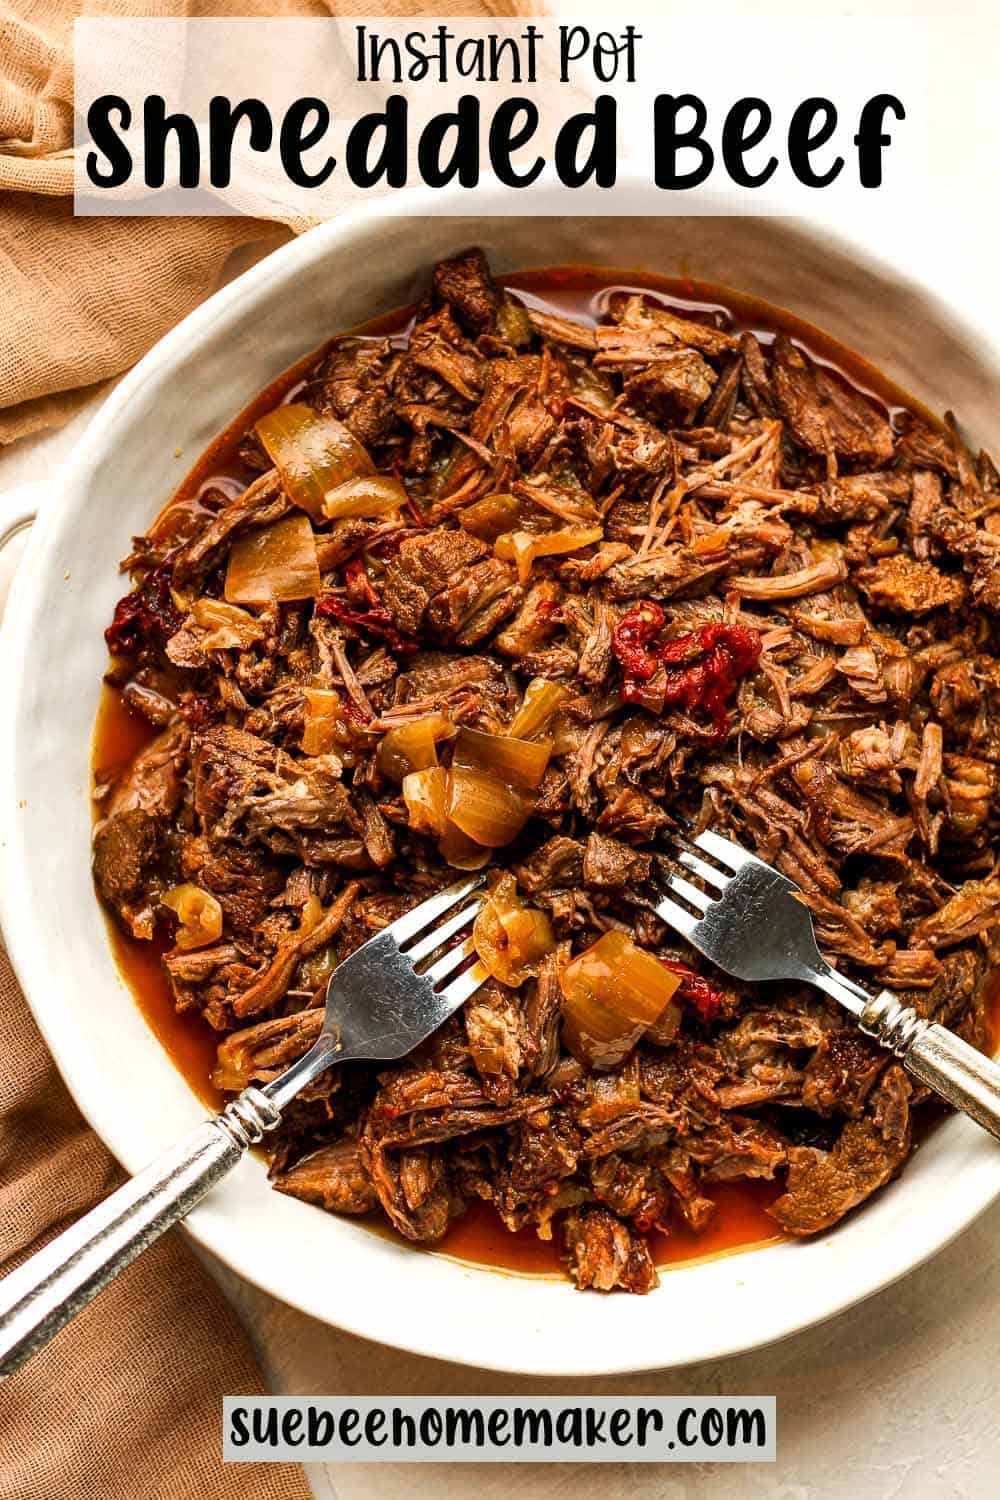 A round dish of instant pot shredded beef with two forks.